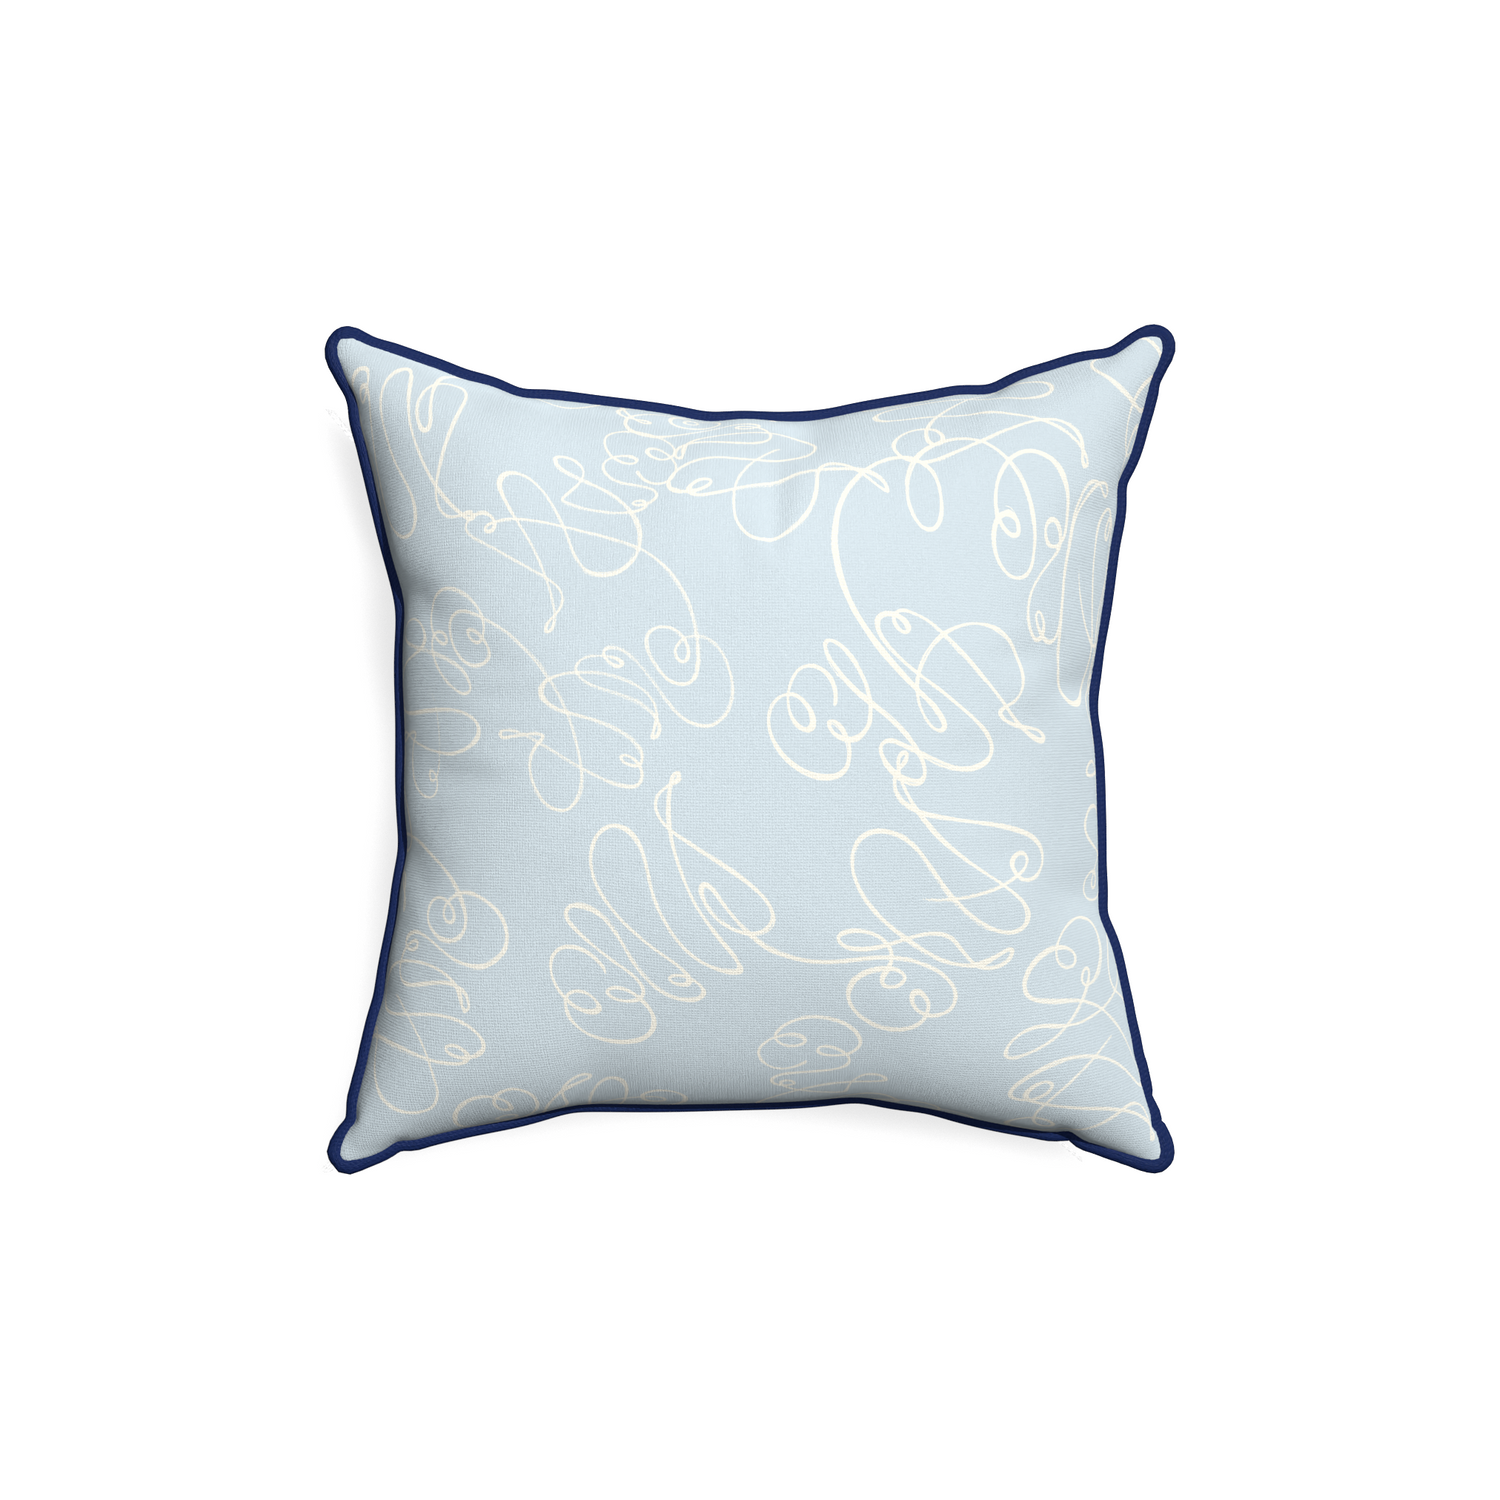 18-square mirabella custom powder blue abstractpillow with midnight piping on white background